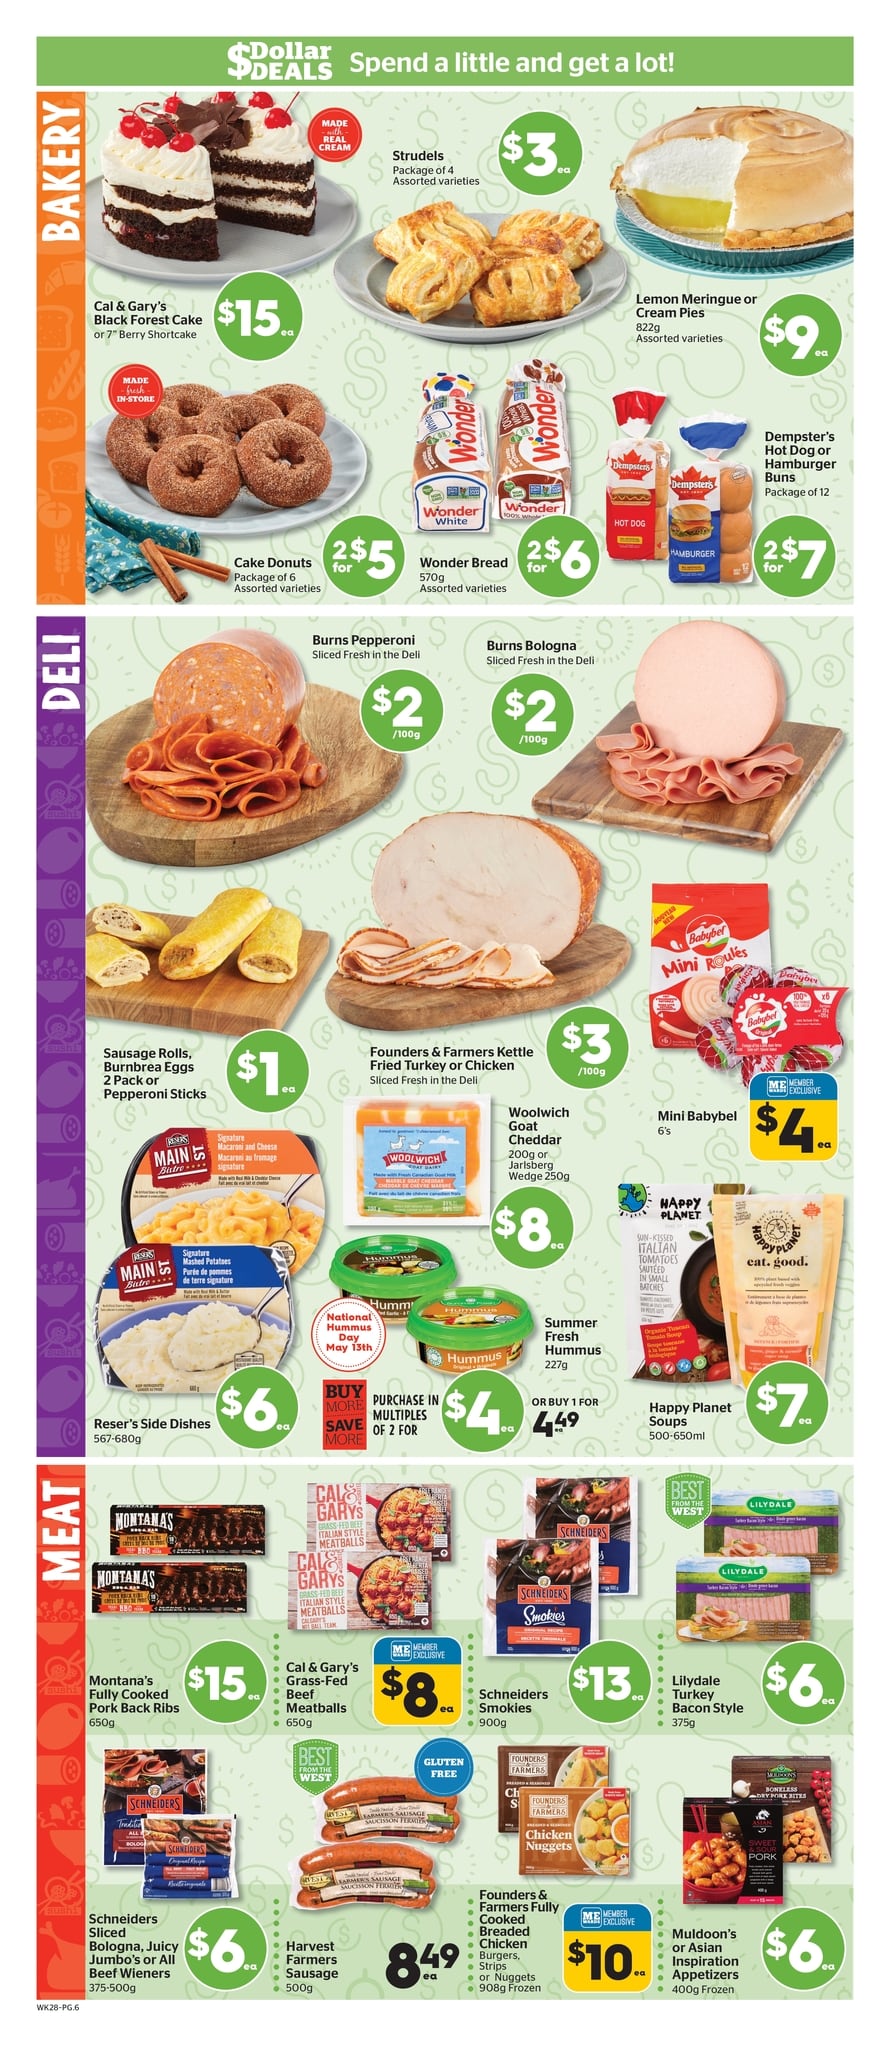 Calgary Co-op - Weekly Flyer Specials - Page 8